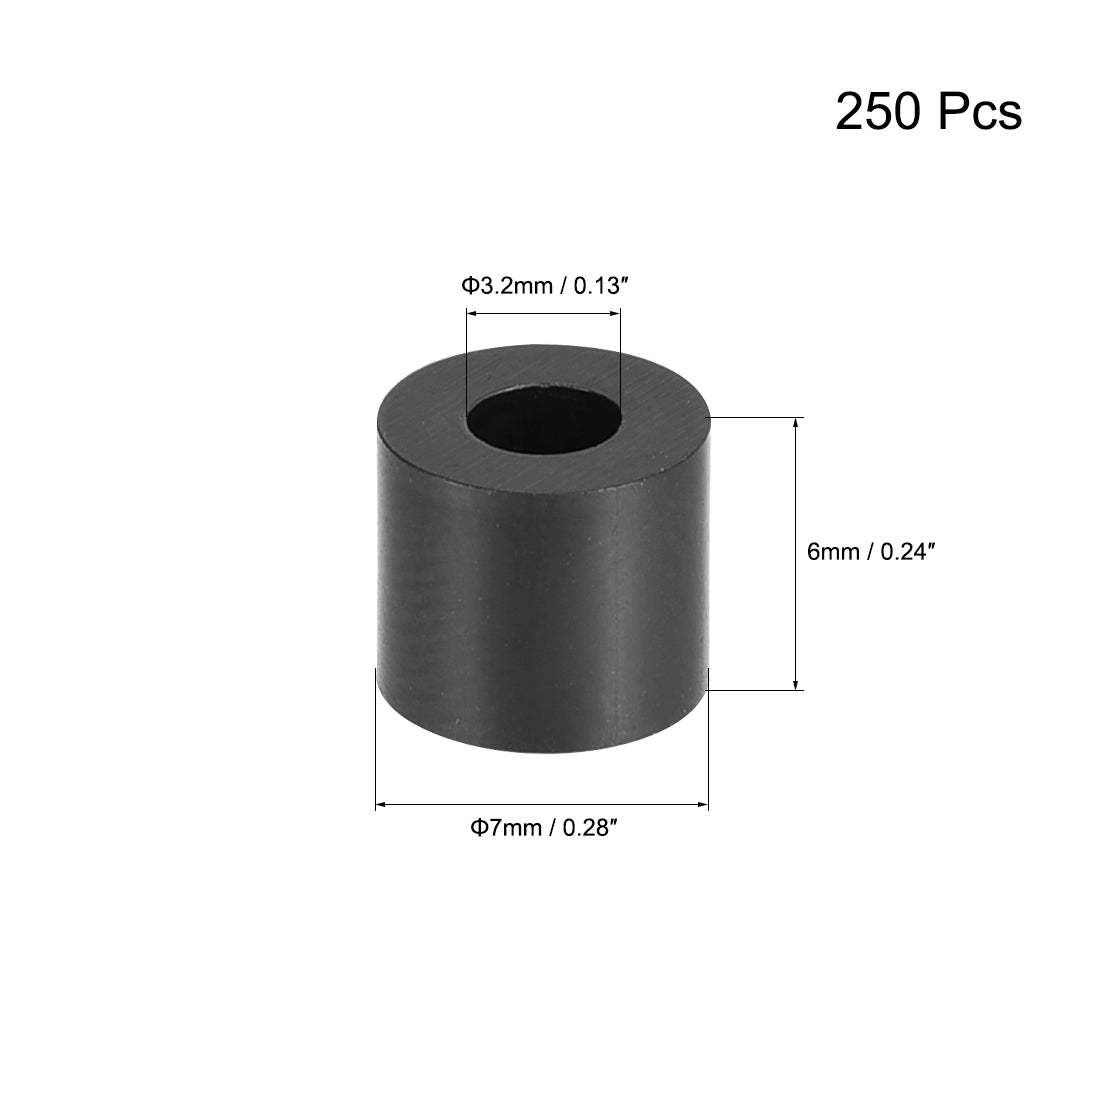 uxcell Uxcell ABS Round Spacer Washer Unthreaded Black 250Pcs, for 3D Printer TV Wall Mount Outlet Pegboard Motorbike